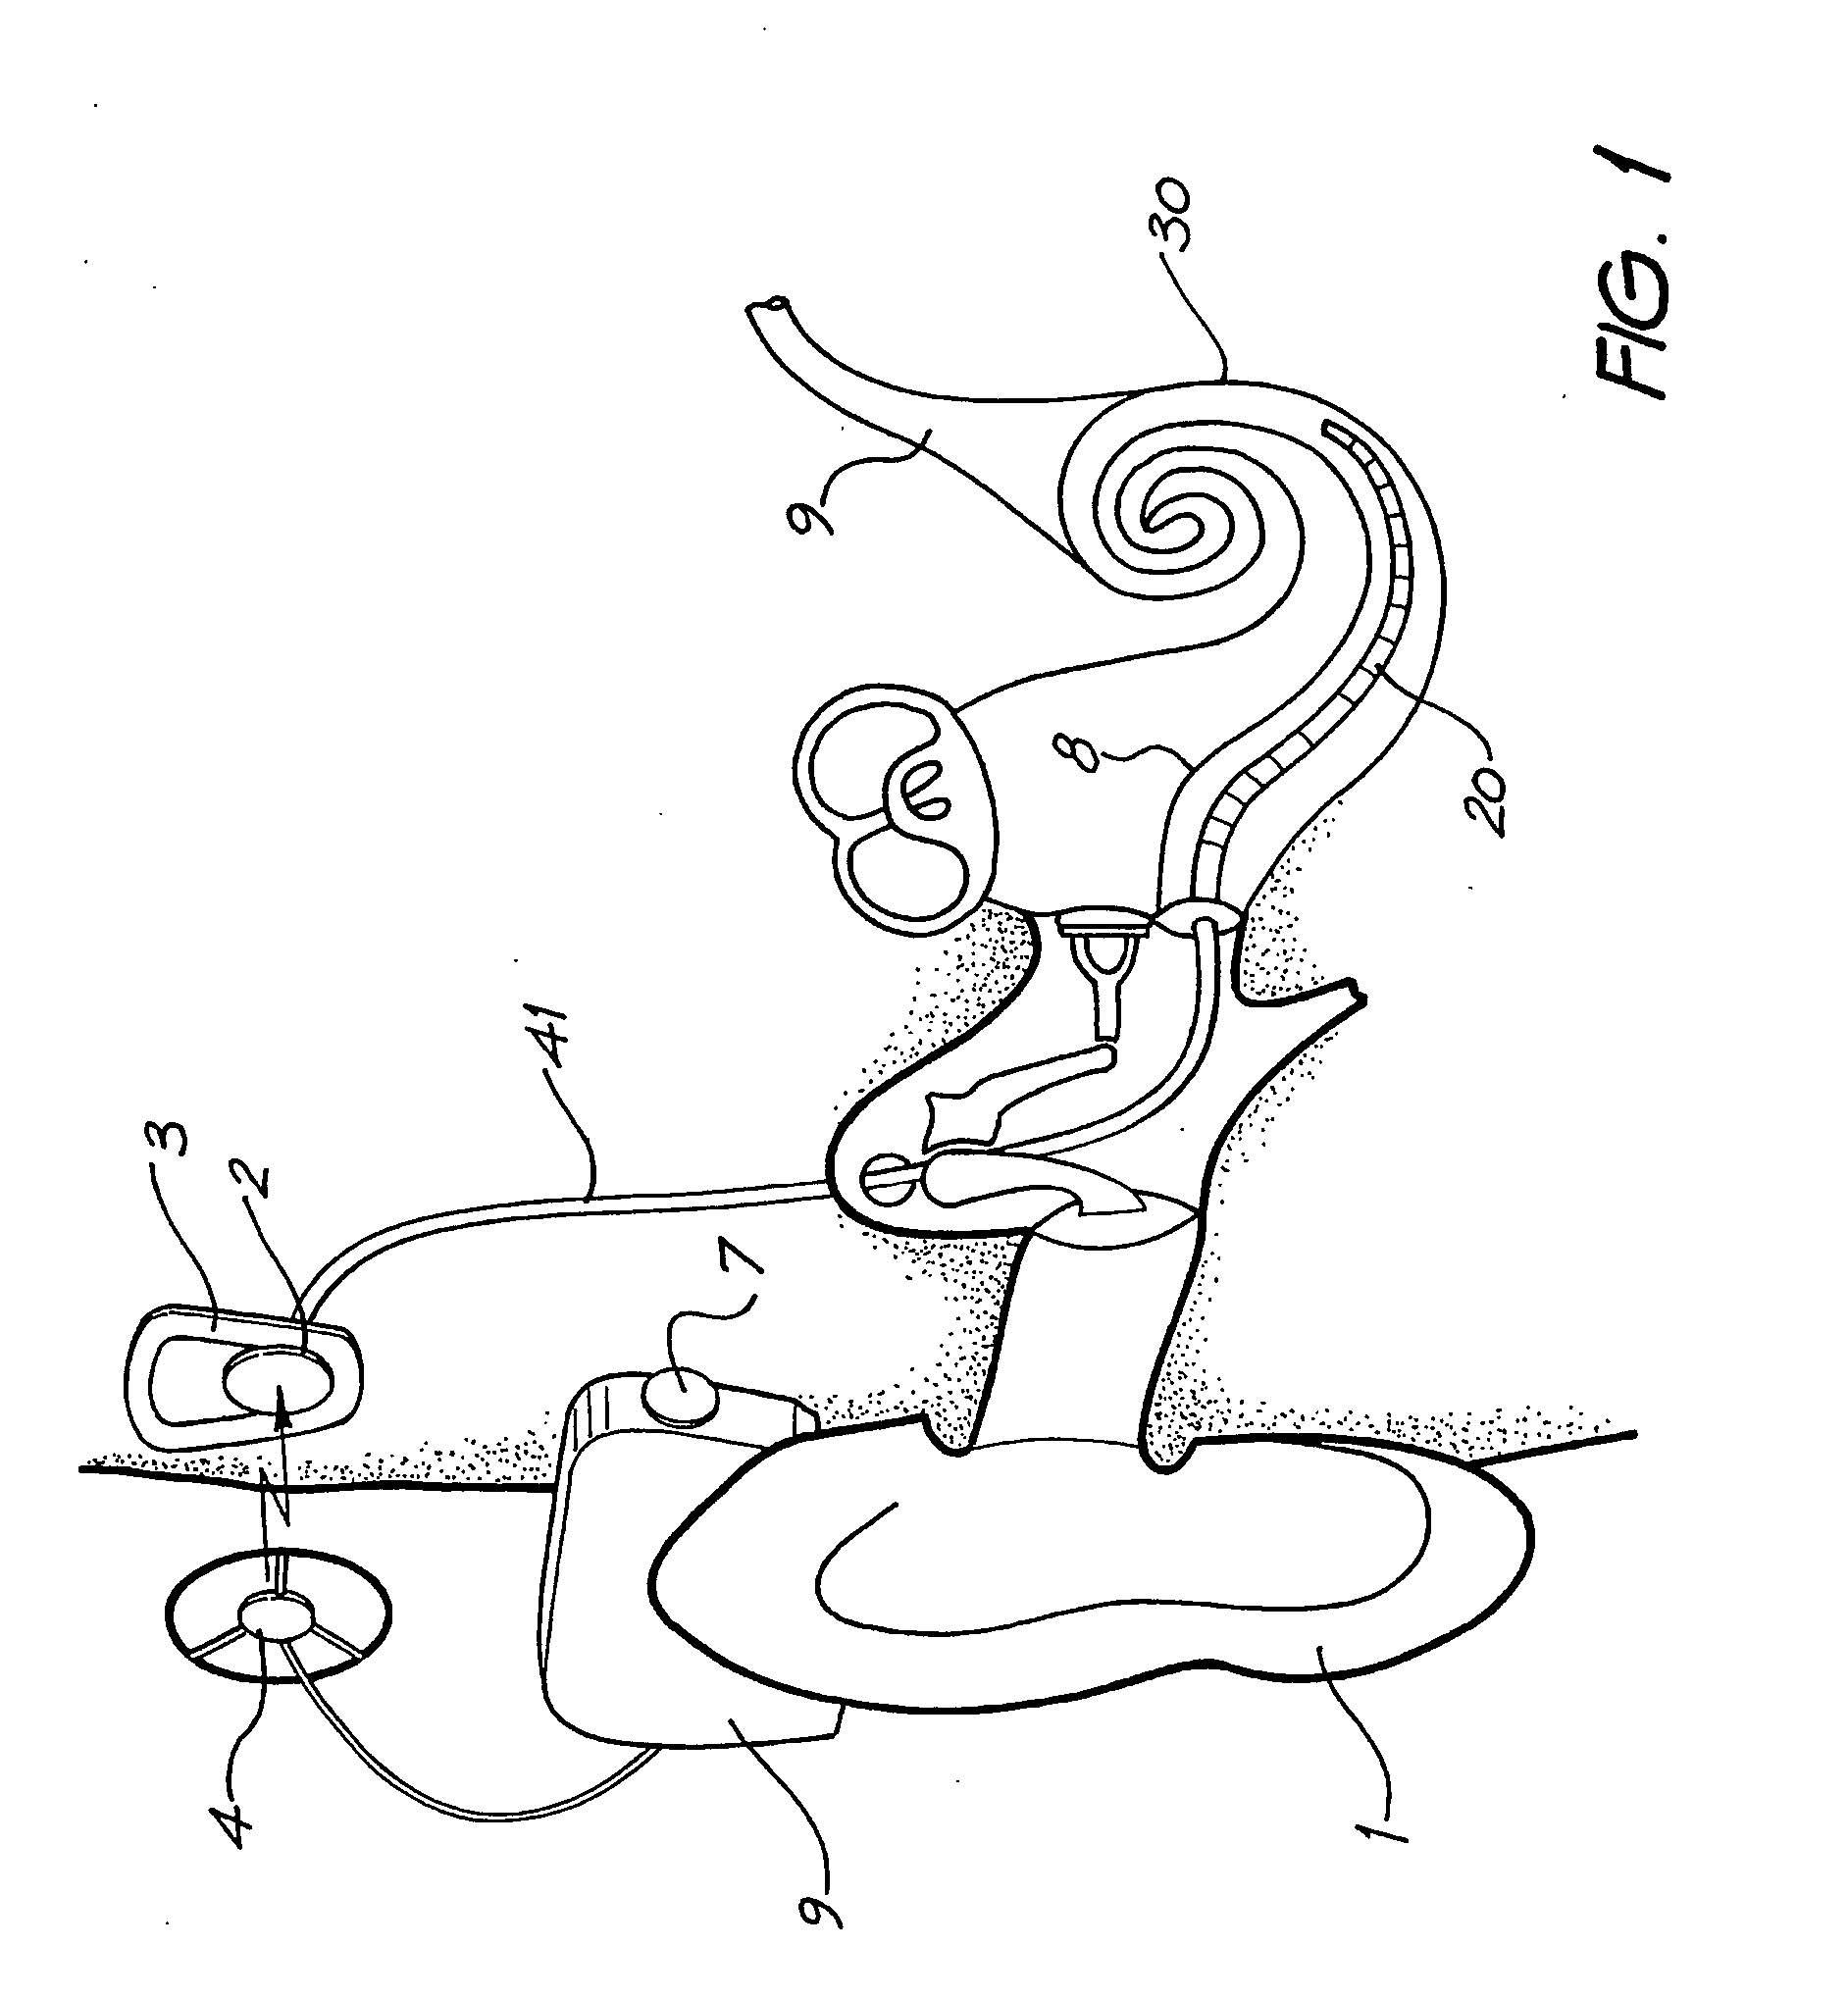 Connector for drug delivery system in cochlear implant